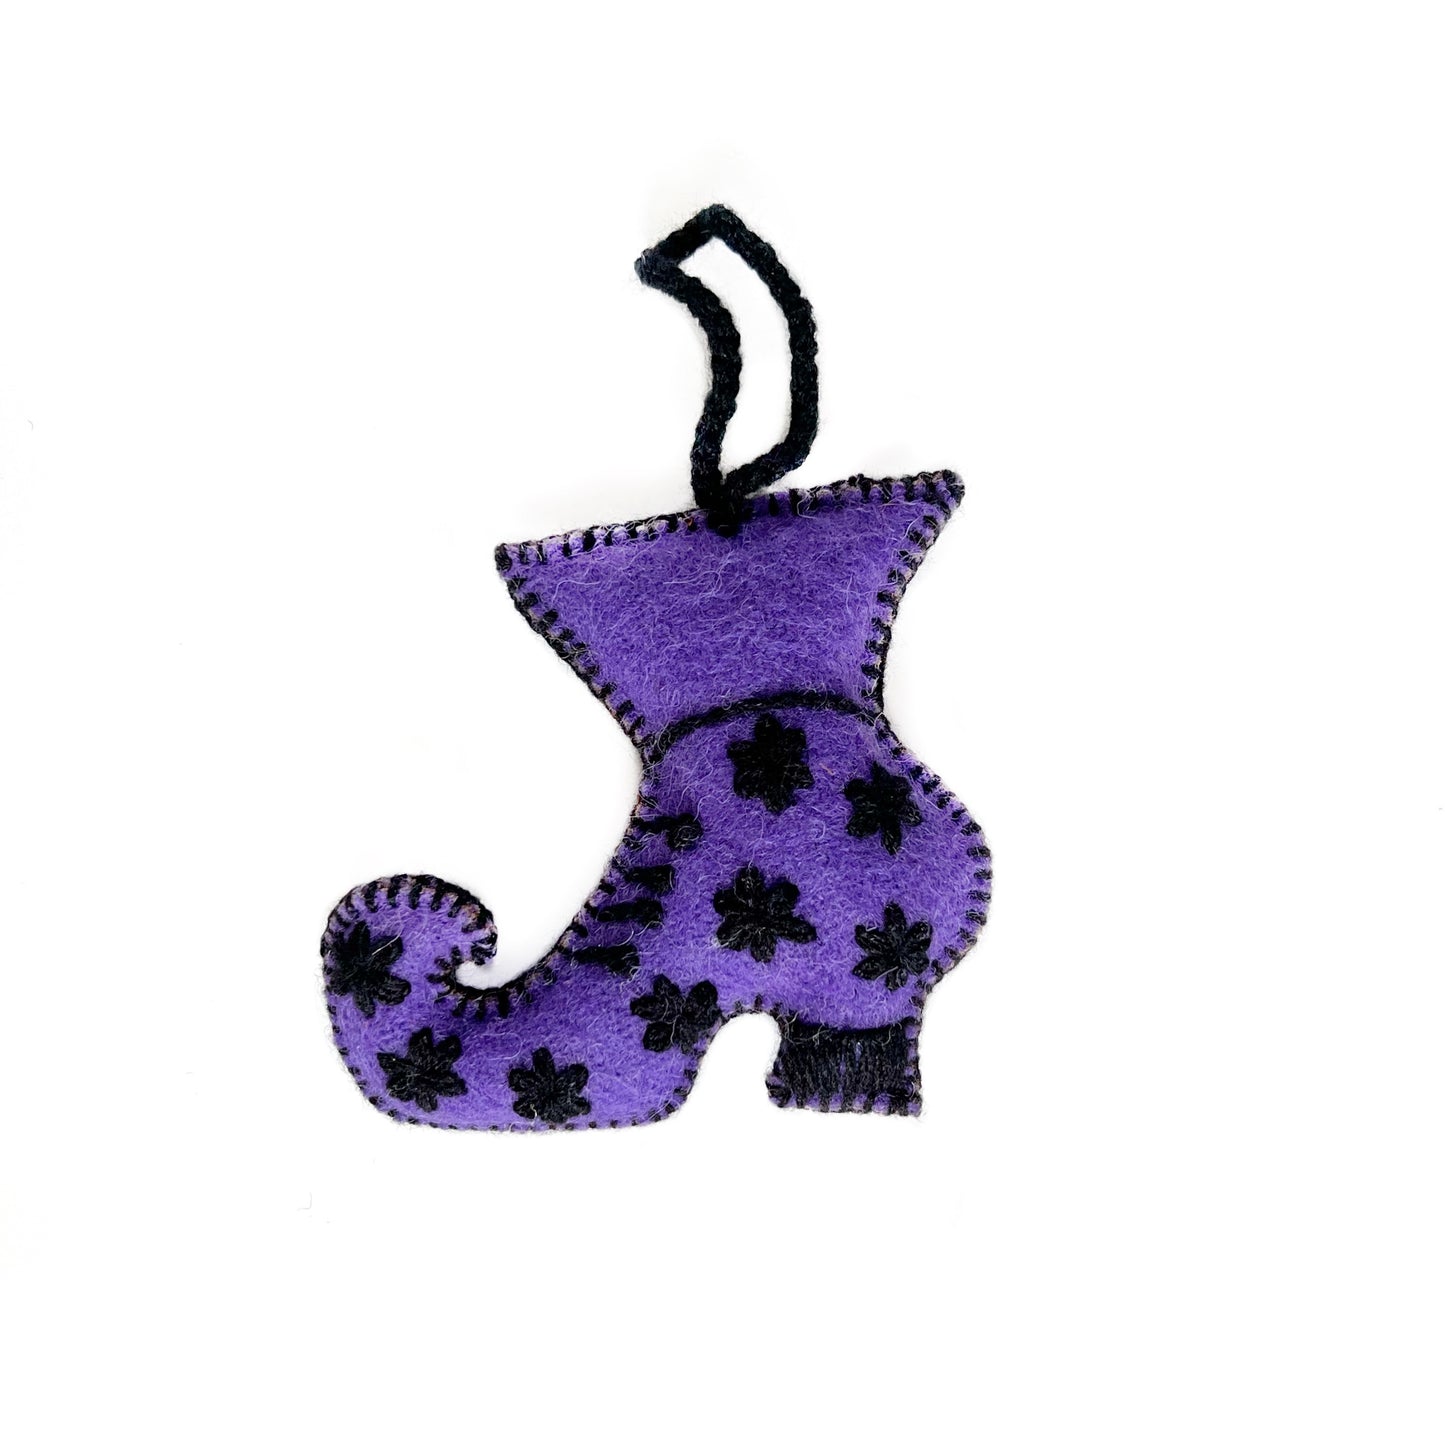 Colorful Halloween Ornament: Witch's Boot